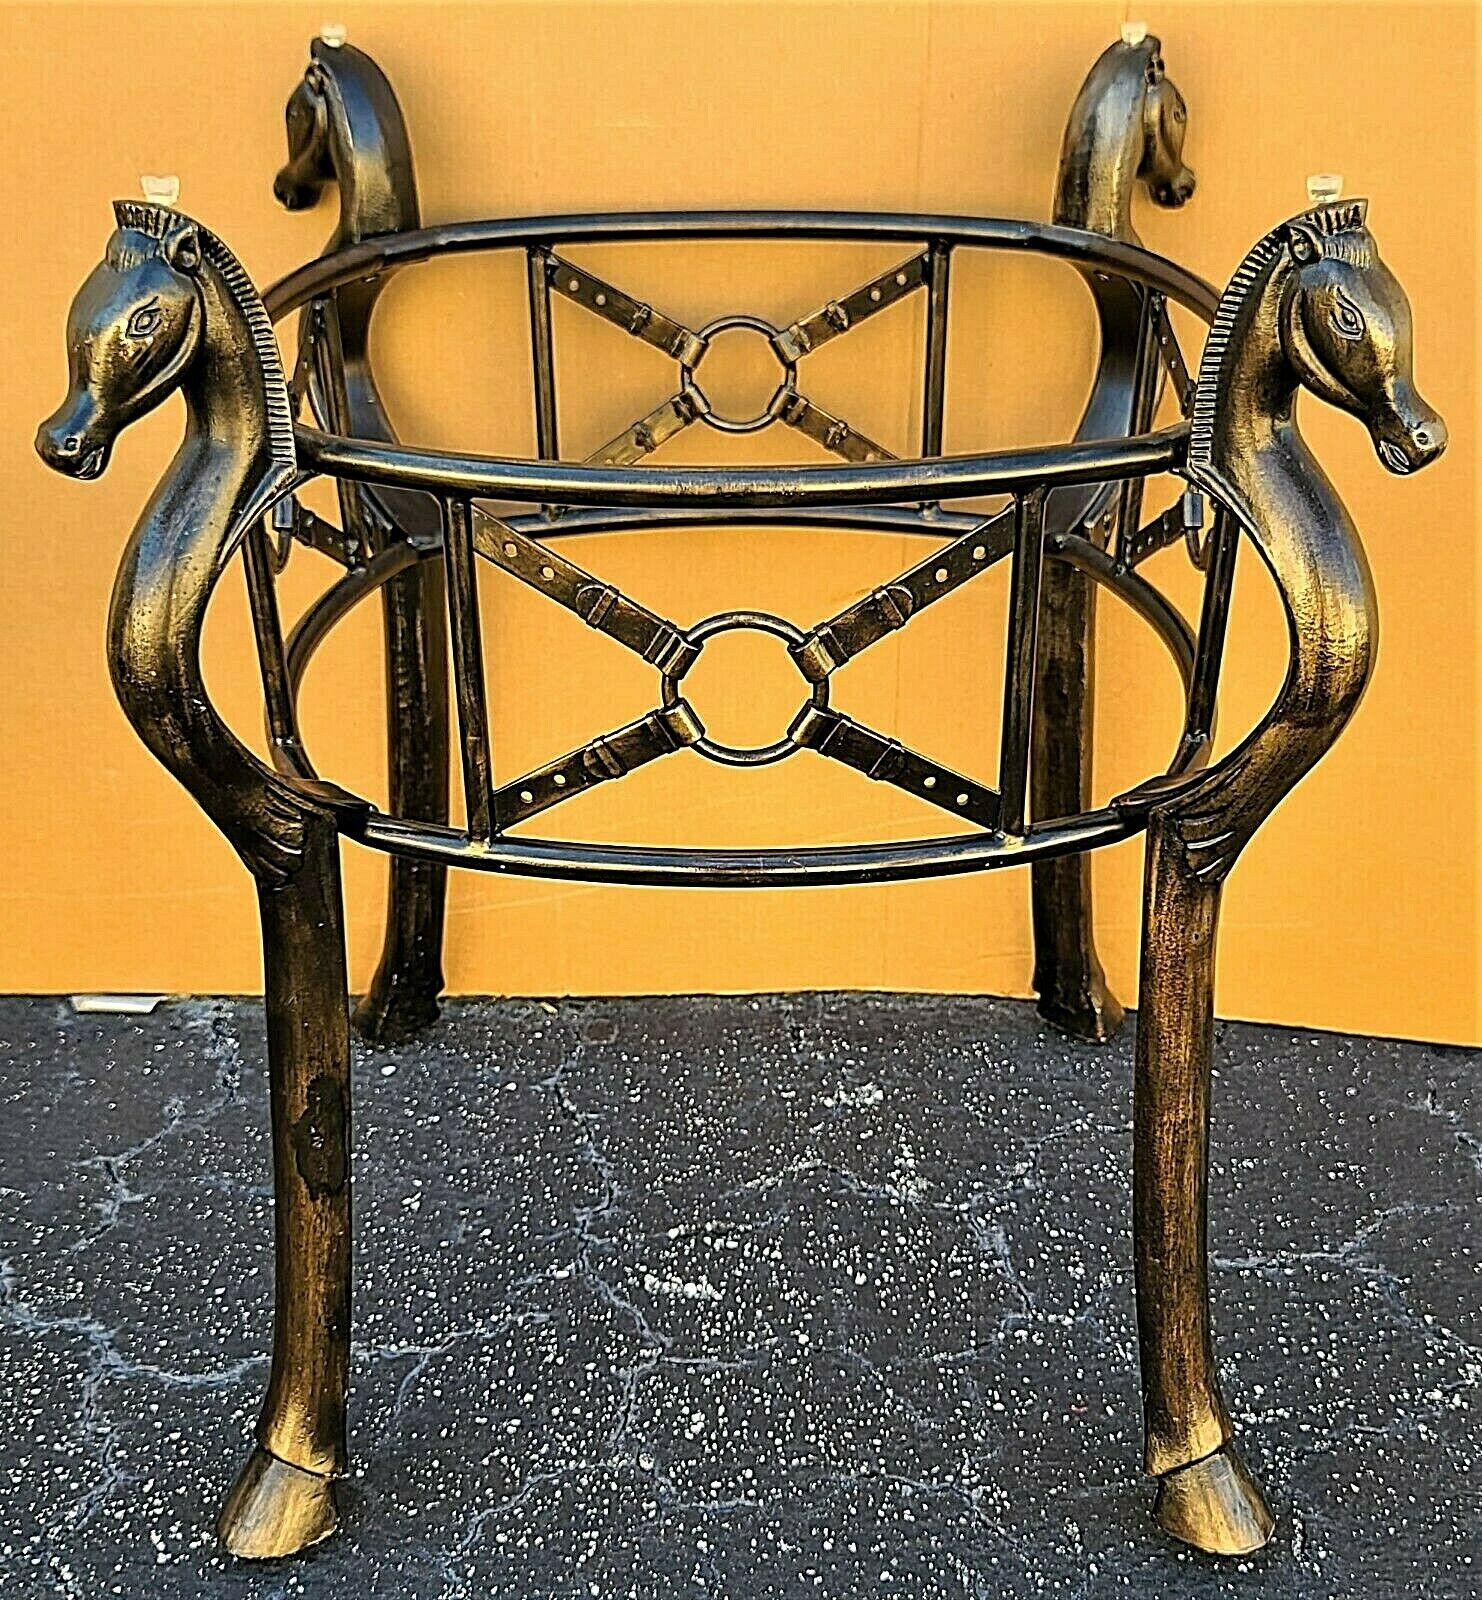 Offering One Of Our Recent Palm Beach Estate Fine Furniture Acquisitions Of A 
5 Piece Jacques Adnet Hermes Style Iron Equestrian Dining Set
We called it our 4 Horseman of the Apocalypse Dining Set

Featuring 4 Horseheads supporting the glass